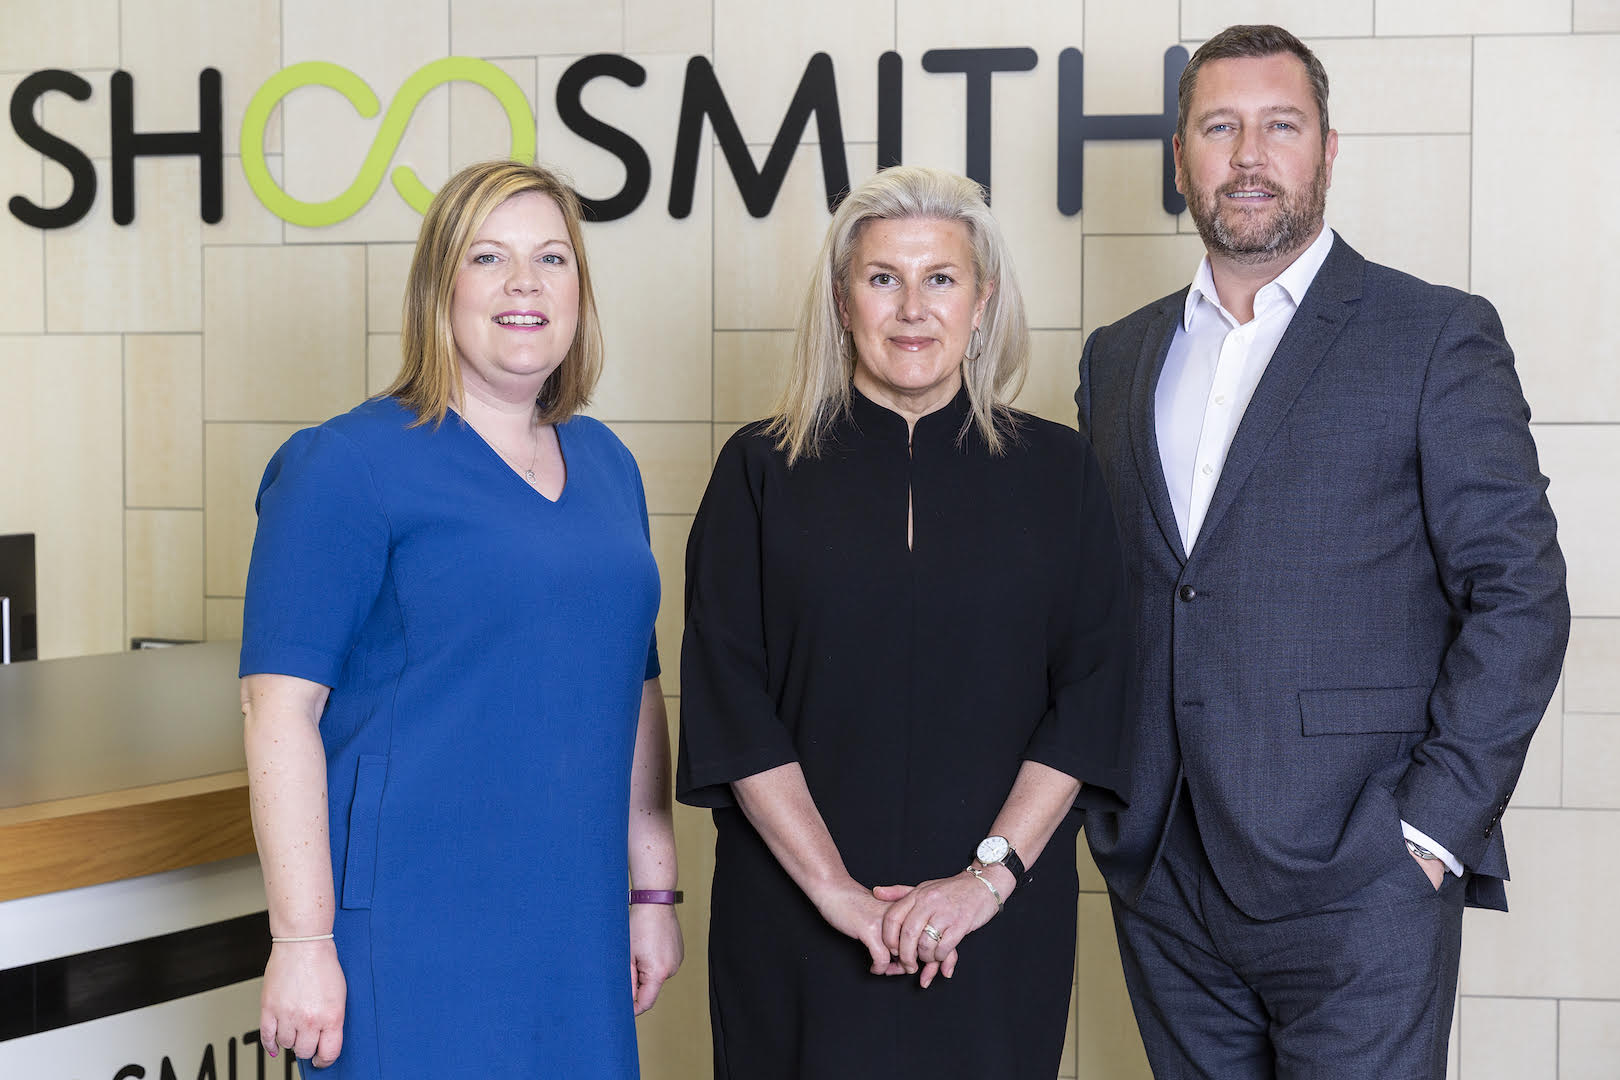 Promotions and lateral hires at Shoosmiths